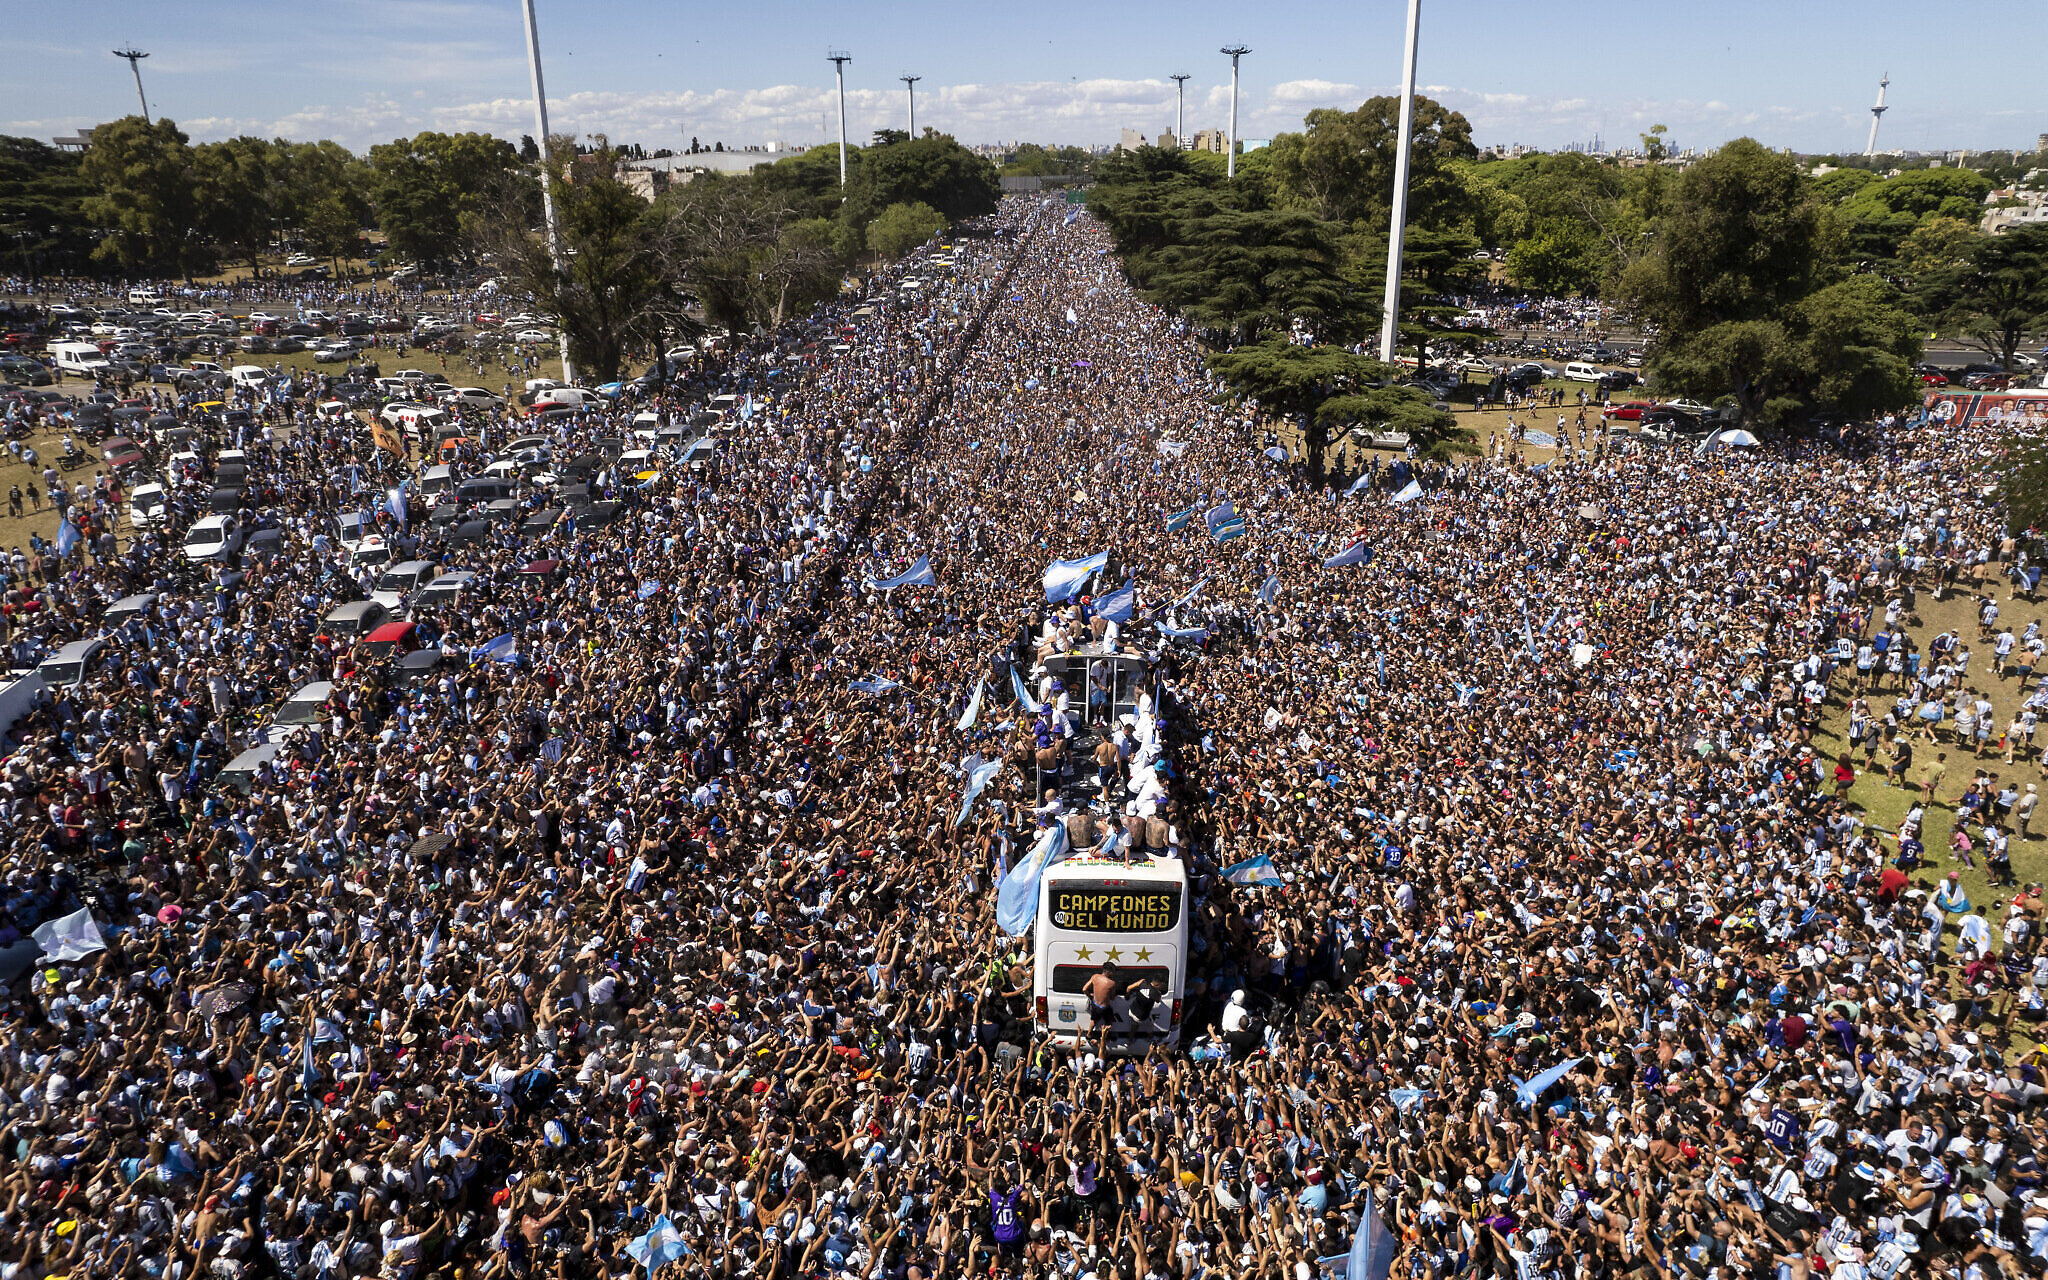 Argentina's World Cup parade abandoned after millions jam streets to